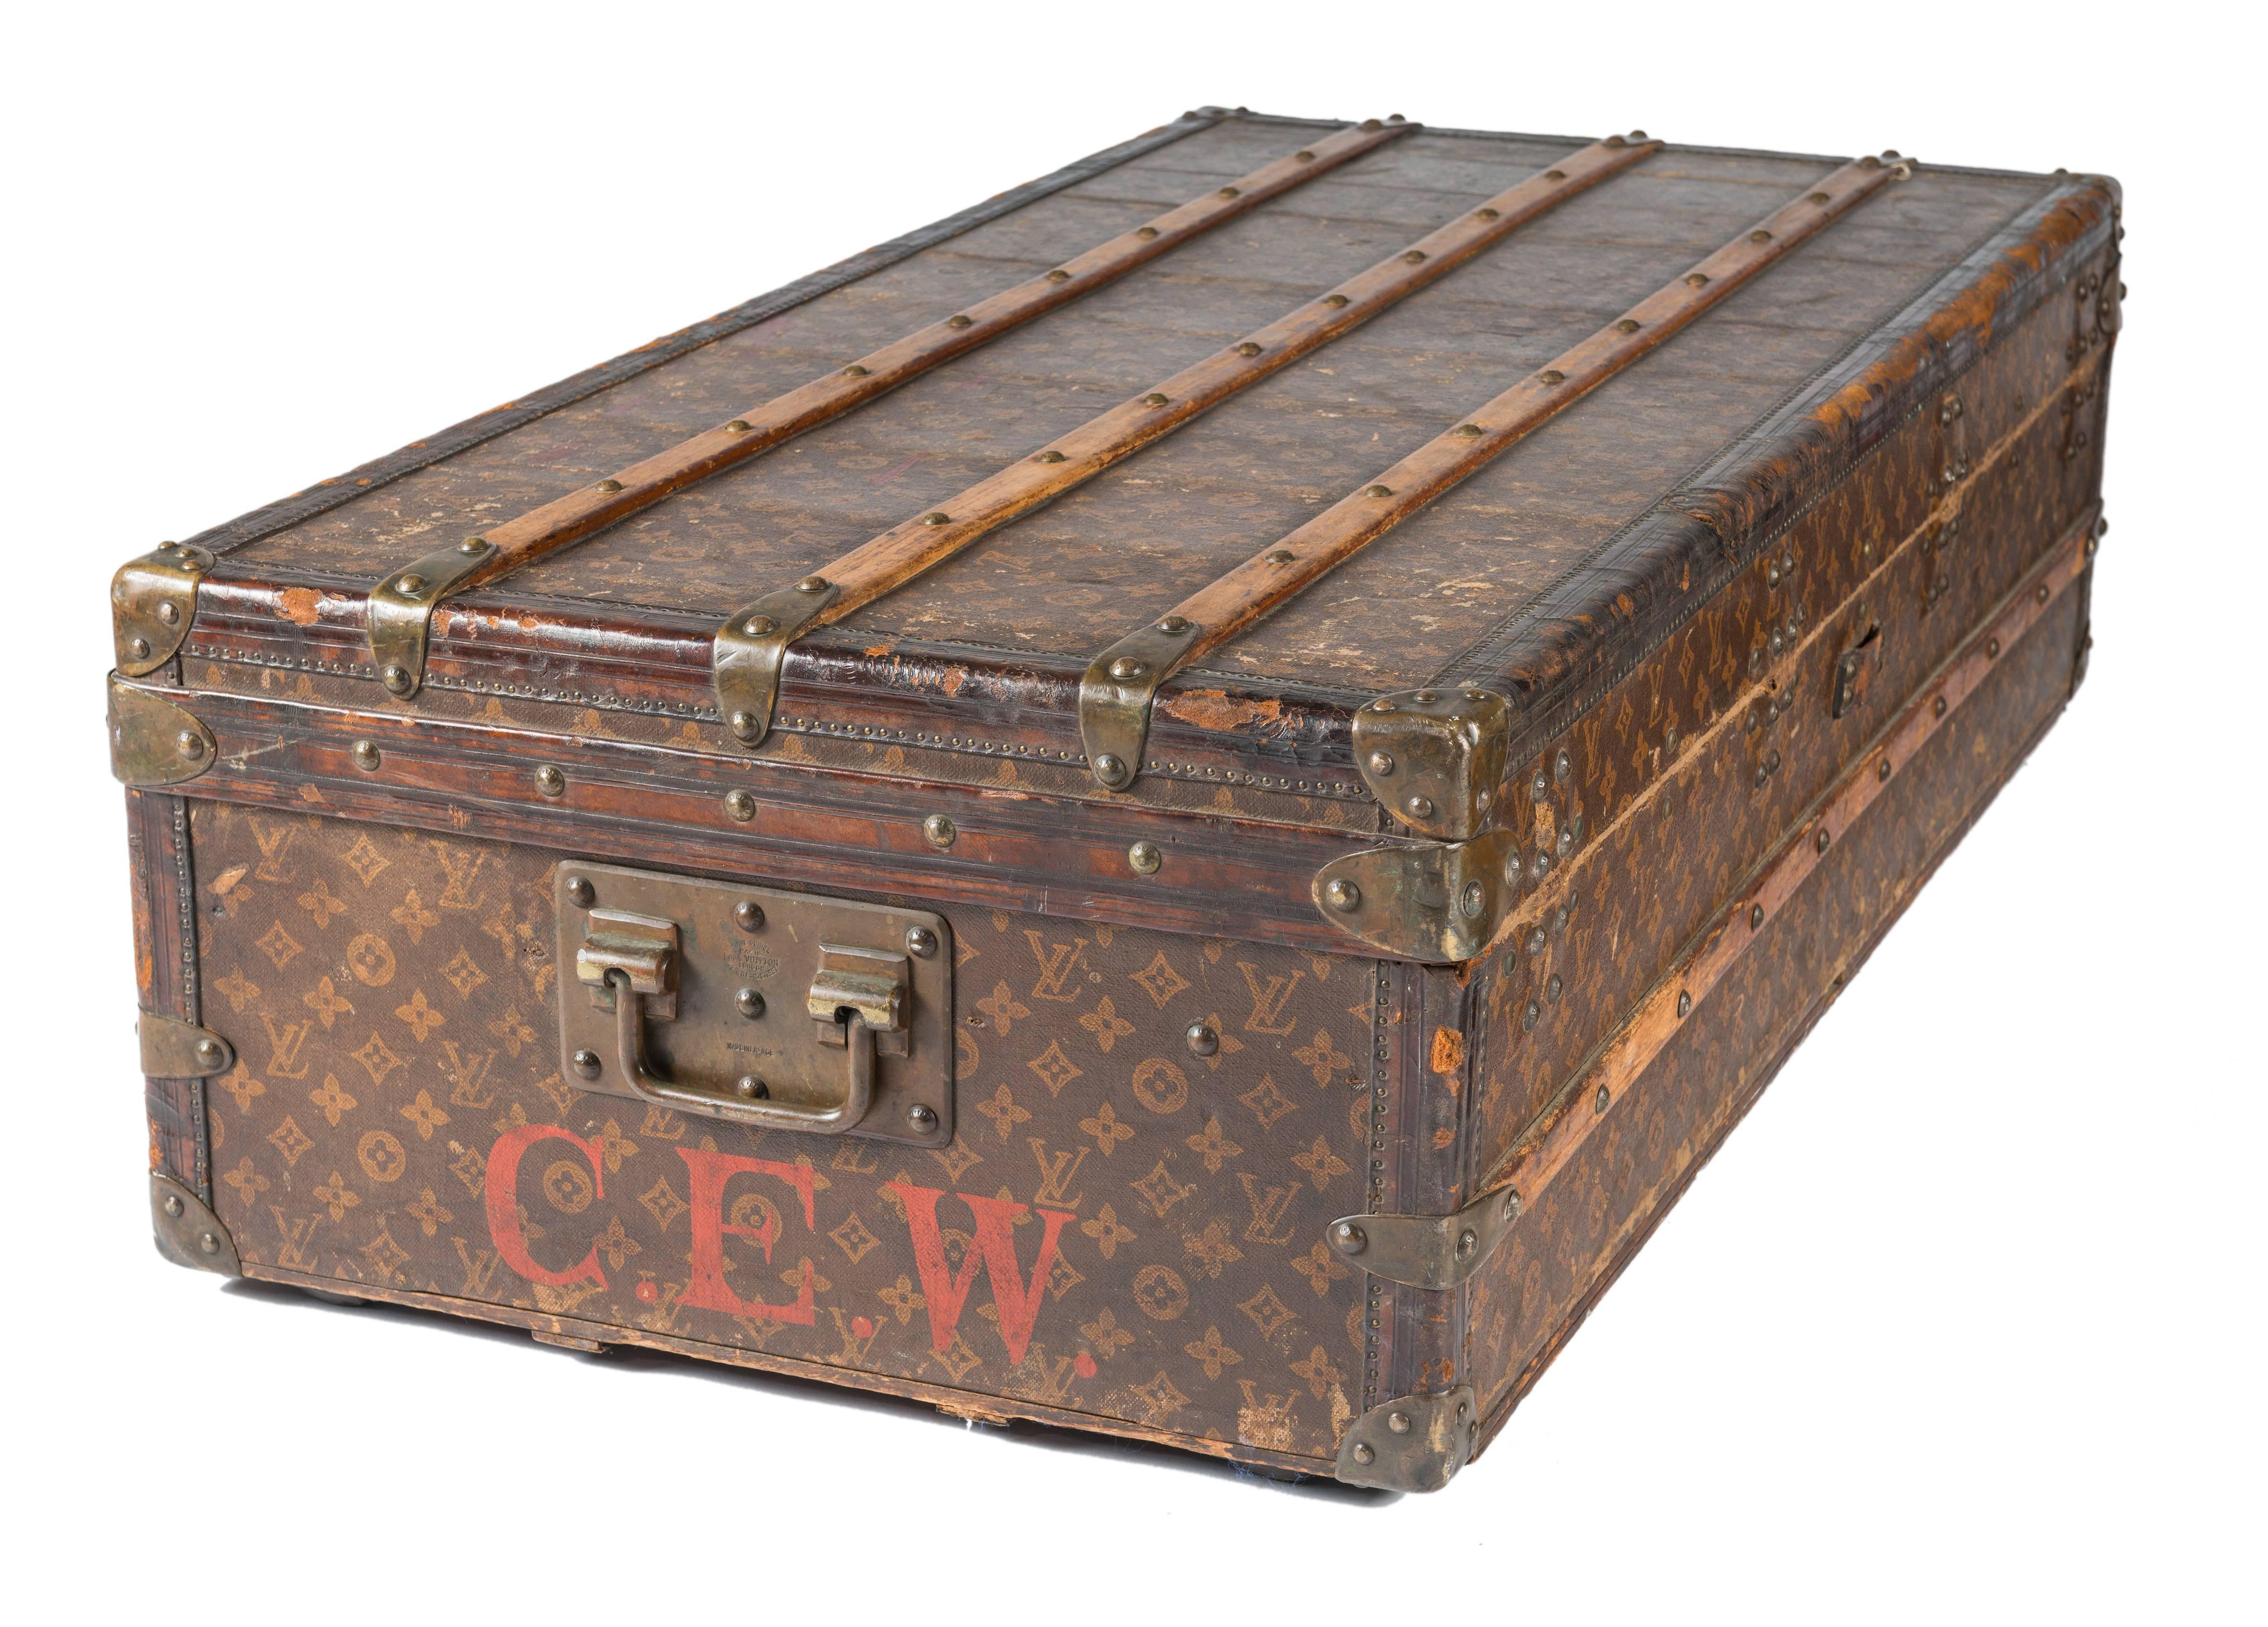 Louis Vuitton flat steamer trunk in good condition. Exterior is very intact with minimal sticker residues. Stenciled initials on the sides. Retailed by John Wanamaker’s Labels and serial number intact. Has provenance.
 